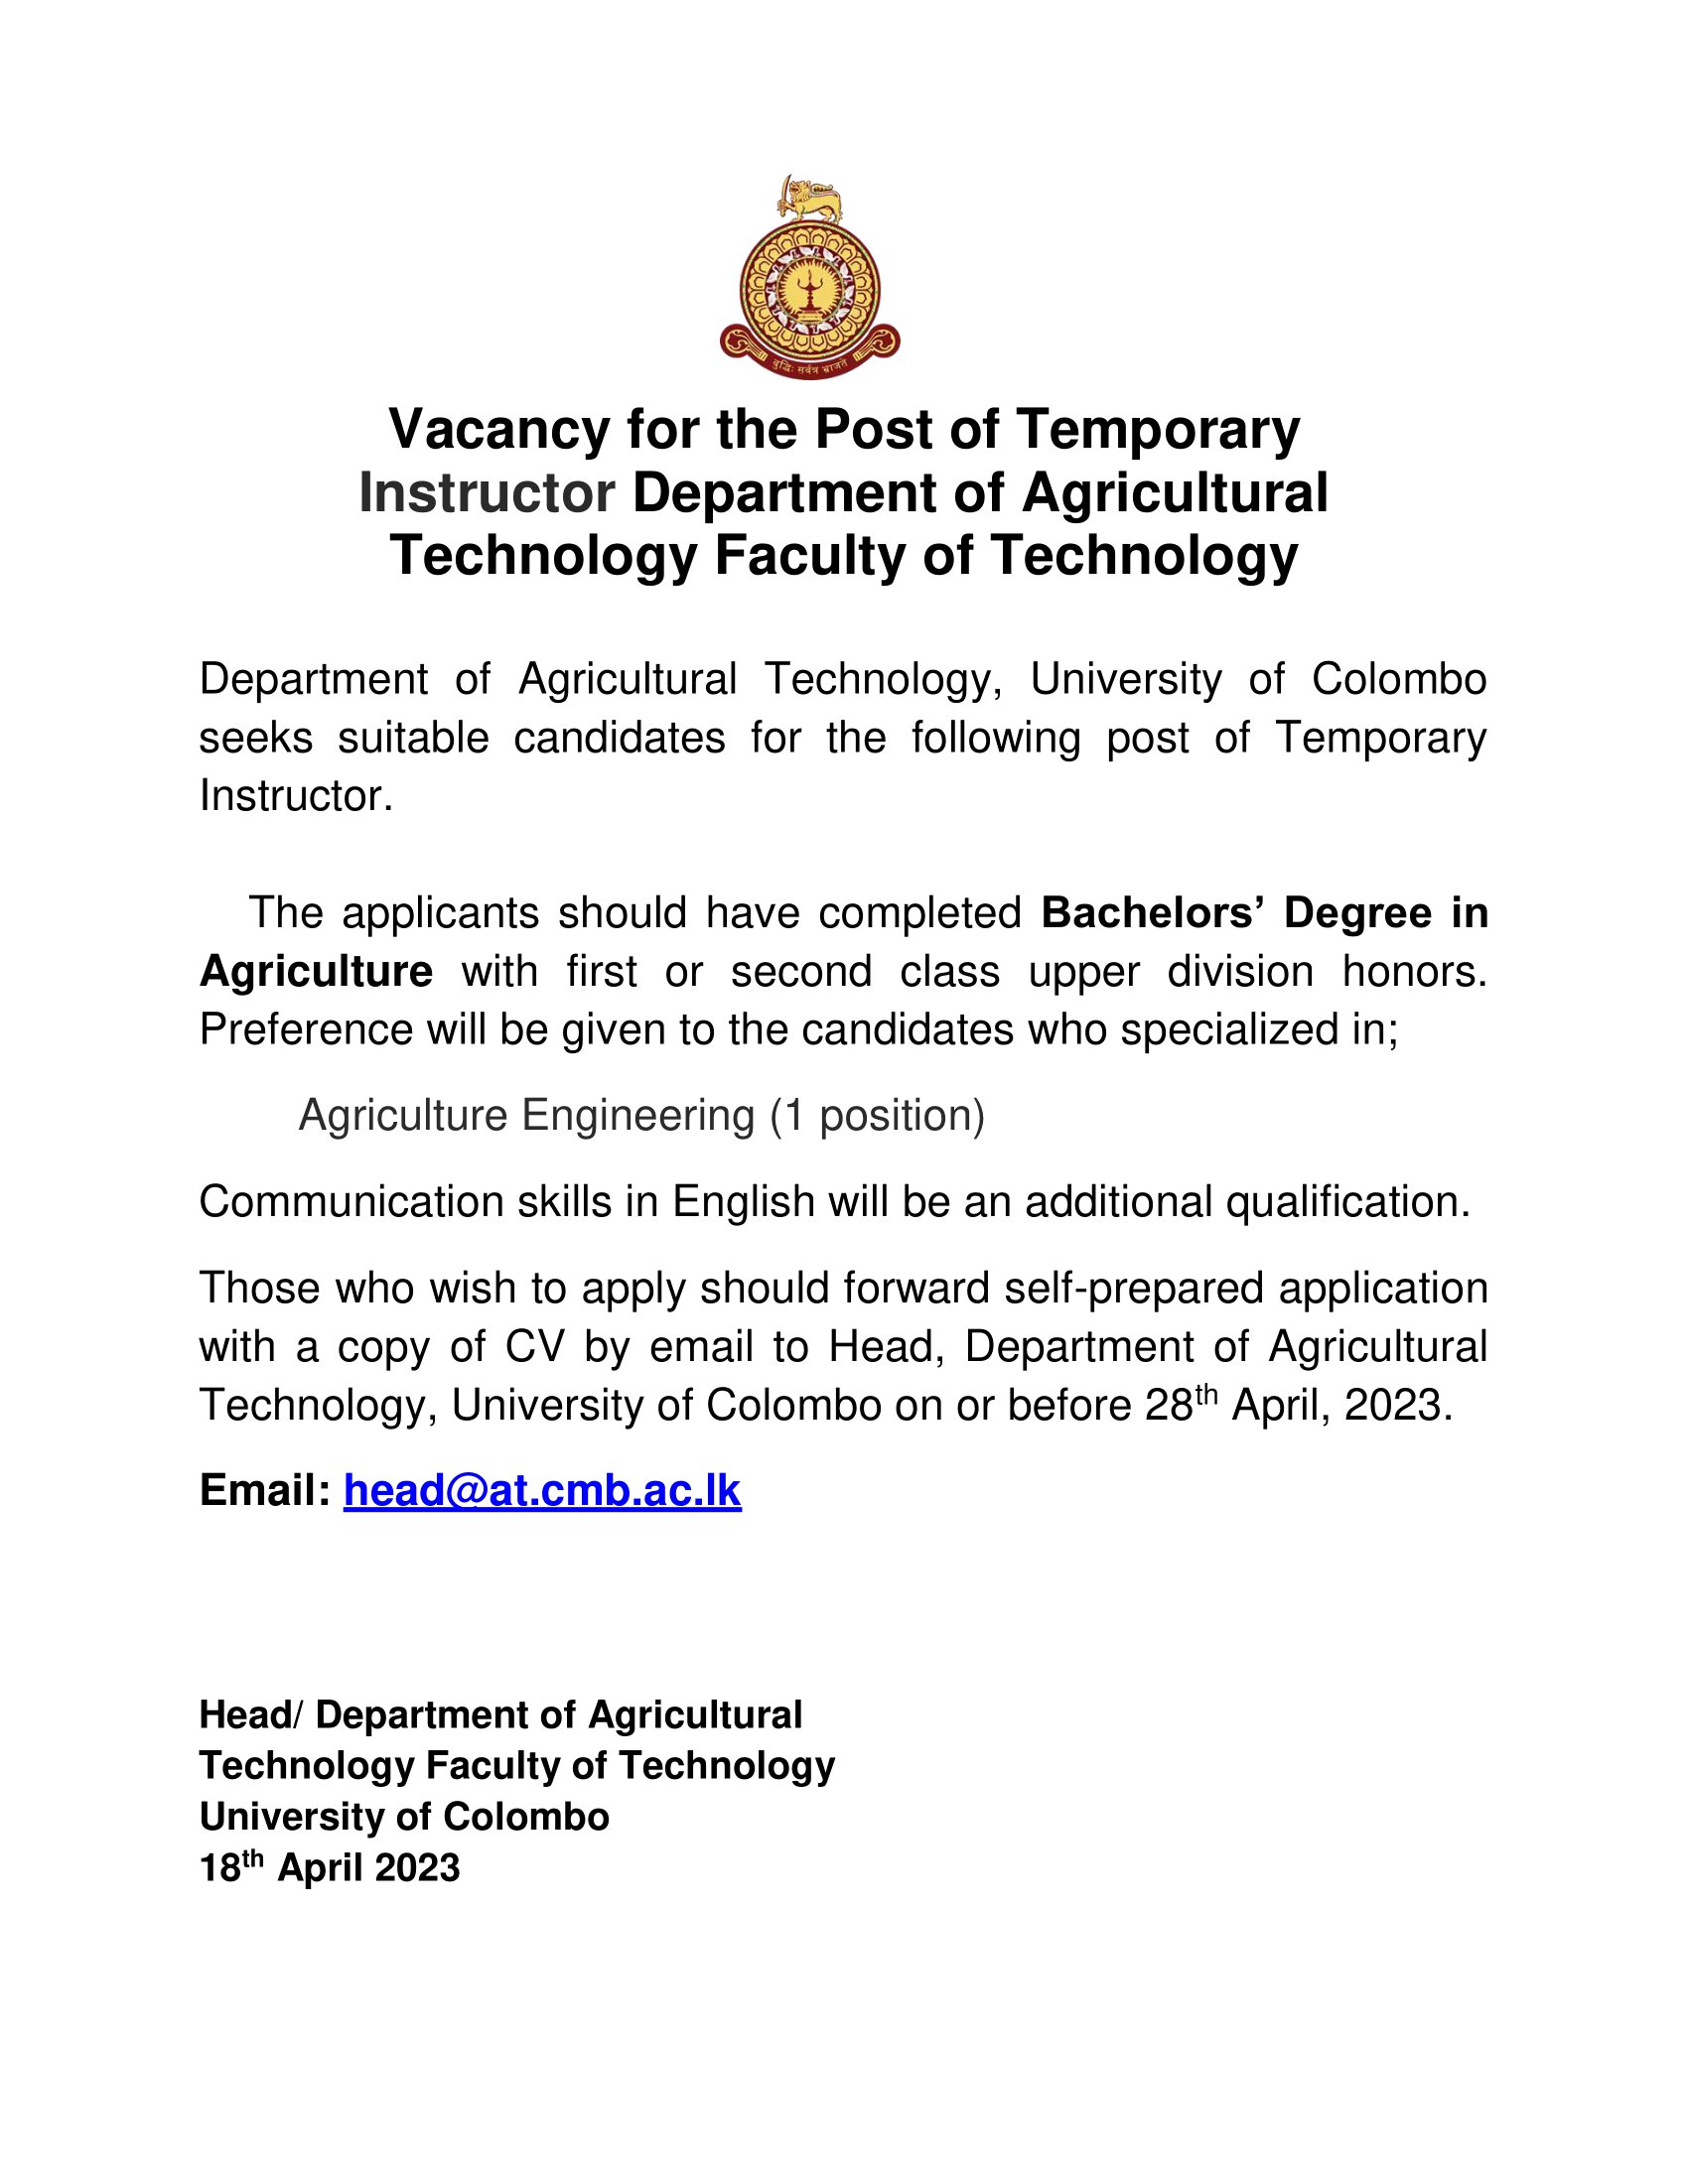 Vacancy for the Post of Temporary Instructor (Department of Agricultural  Technology)